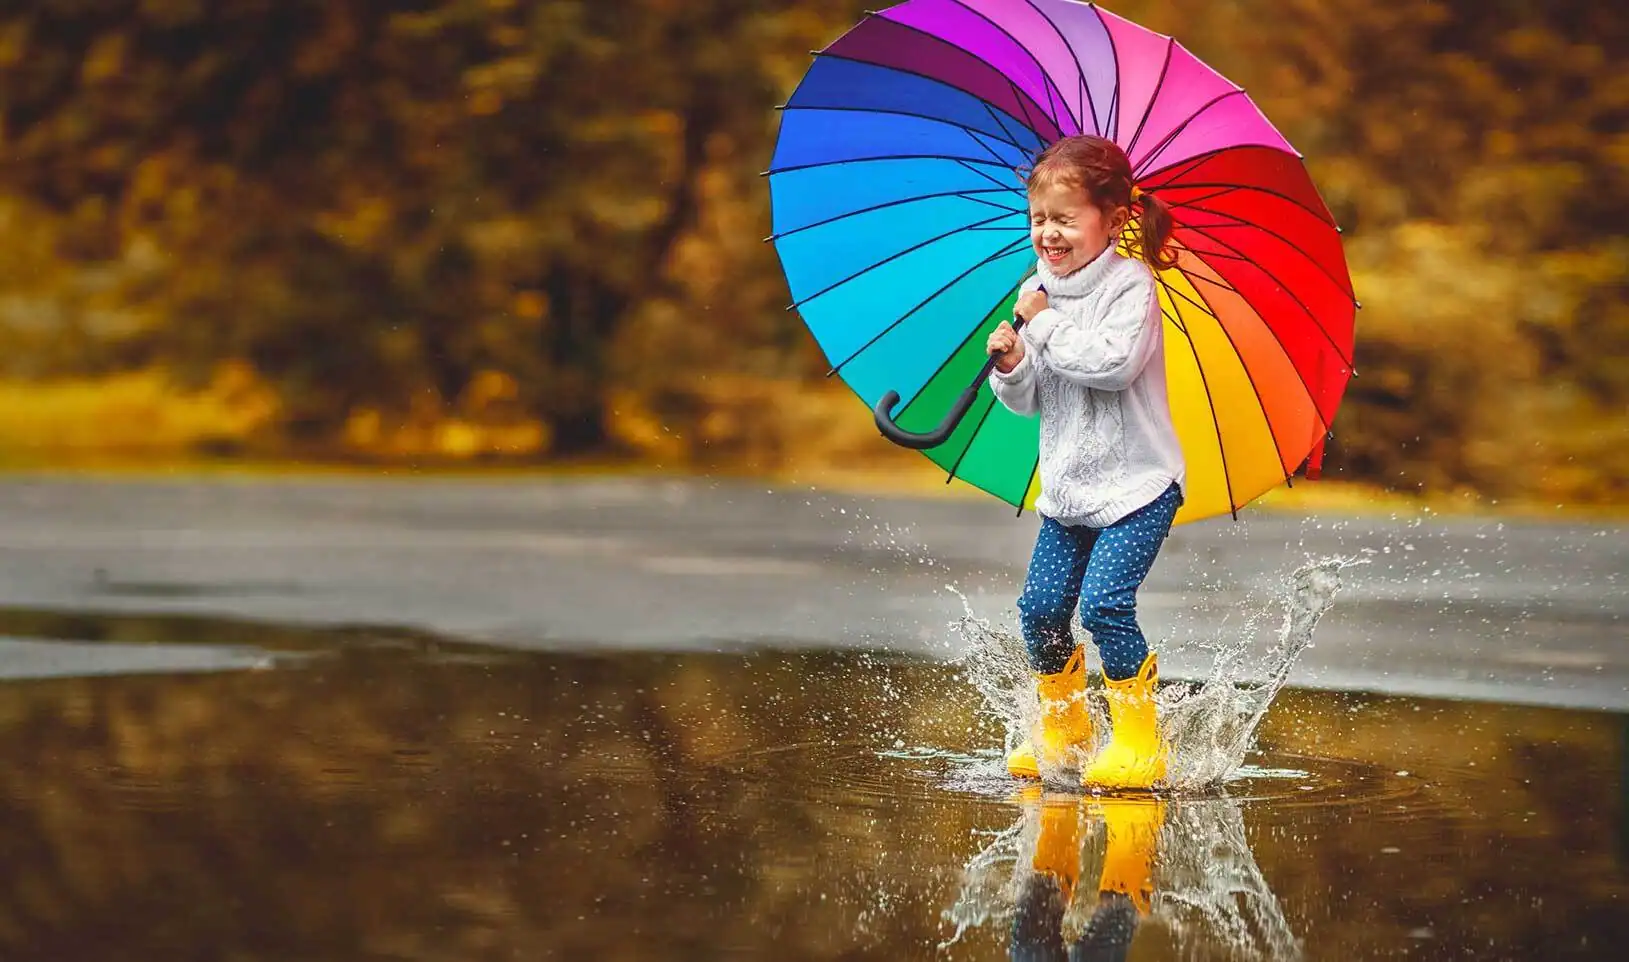 A small girl happily stomping on a puddle while holding a rainbow umbrella